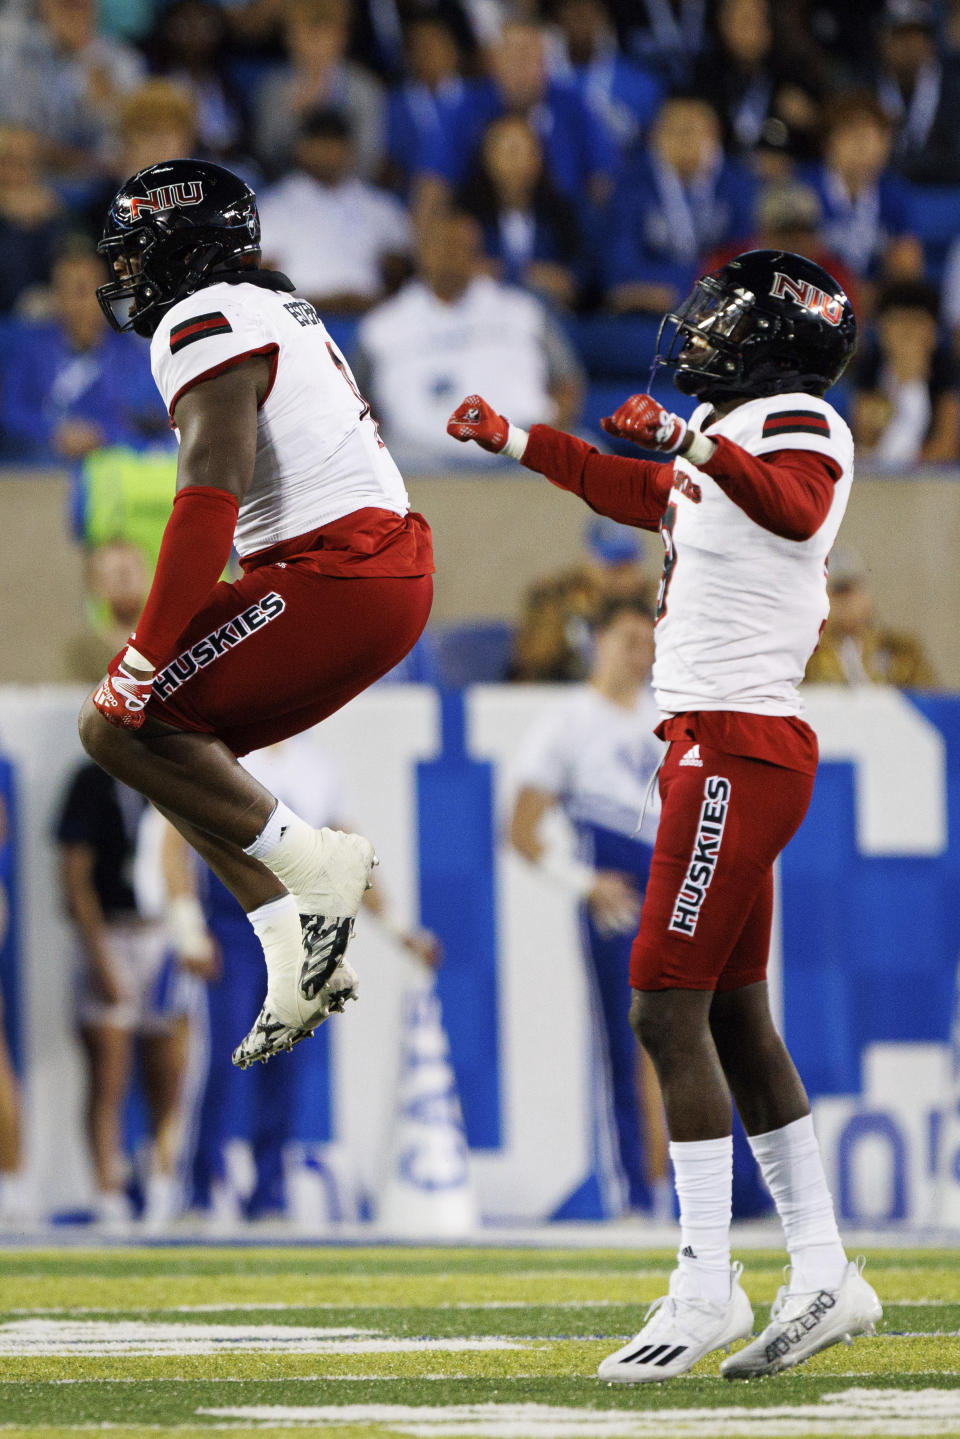 Northern Illinois defensive tackle Devonte O'Malley, left, celebrates after getting a sack during the first half of an NCAA college football game against Kentucky in Lexington, Ky., Saturday, Sept. 24, 2022. (AP Photo/Michael Clubb)